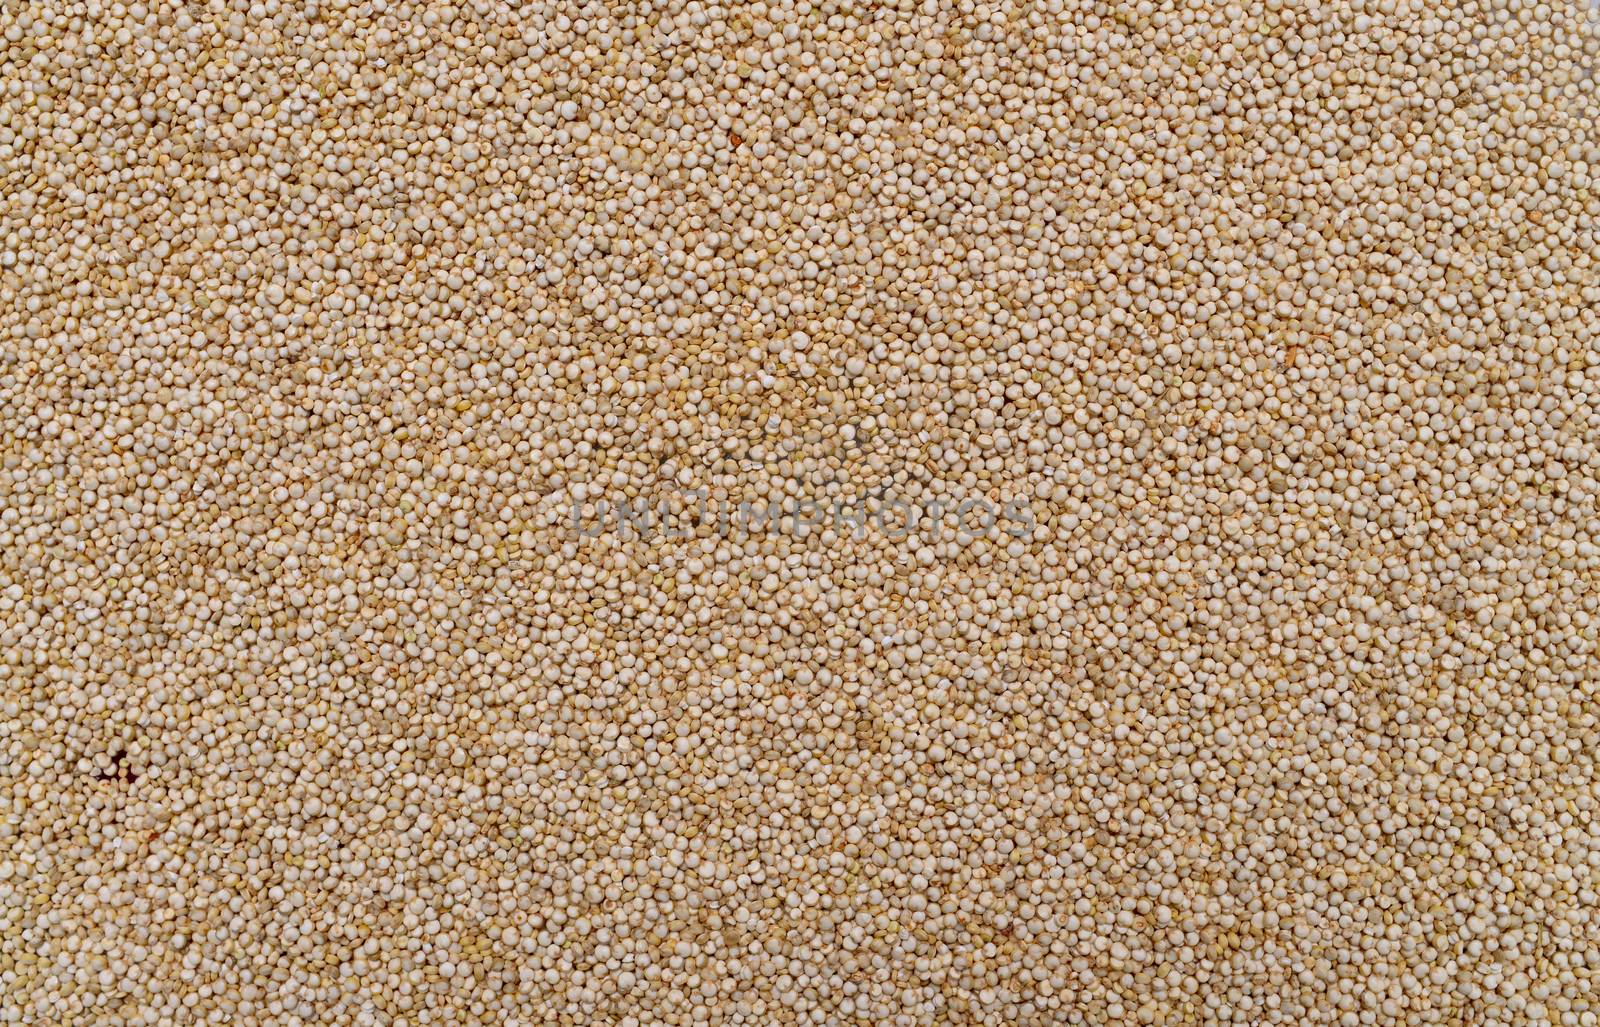 white chia plant dry seeds texture pattern